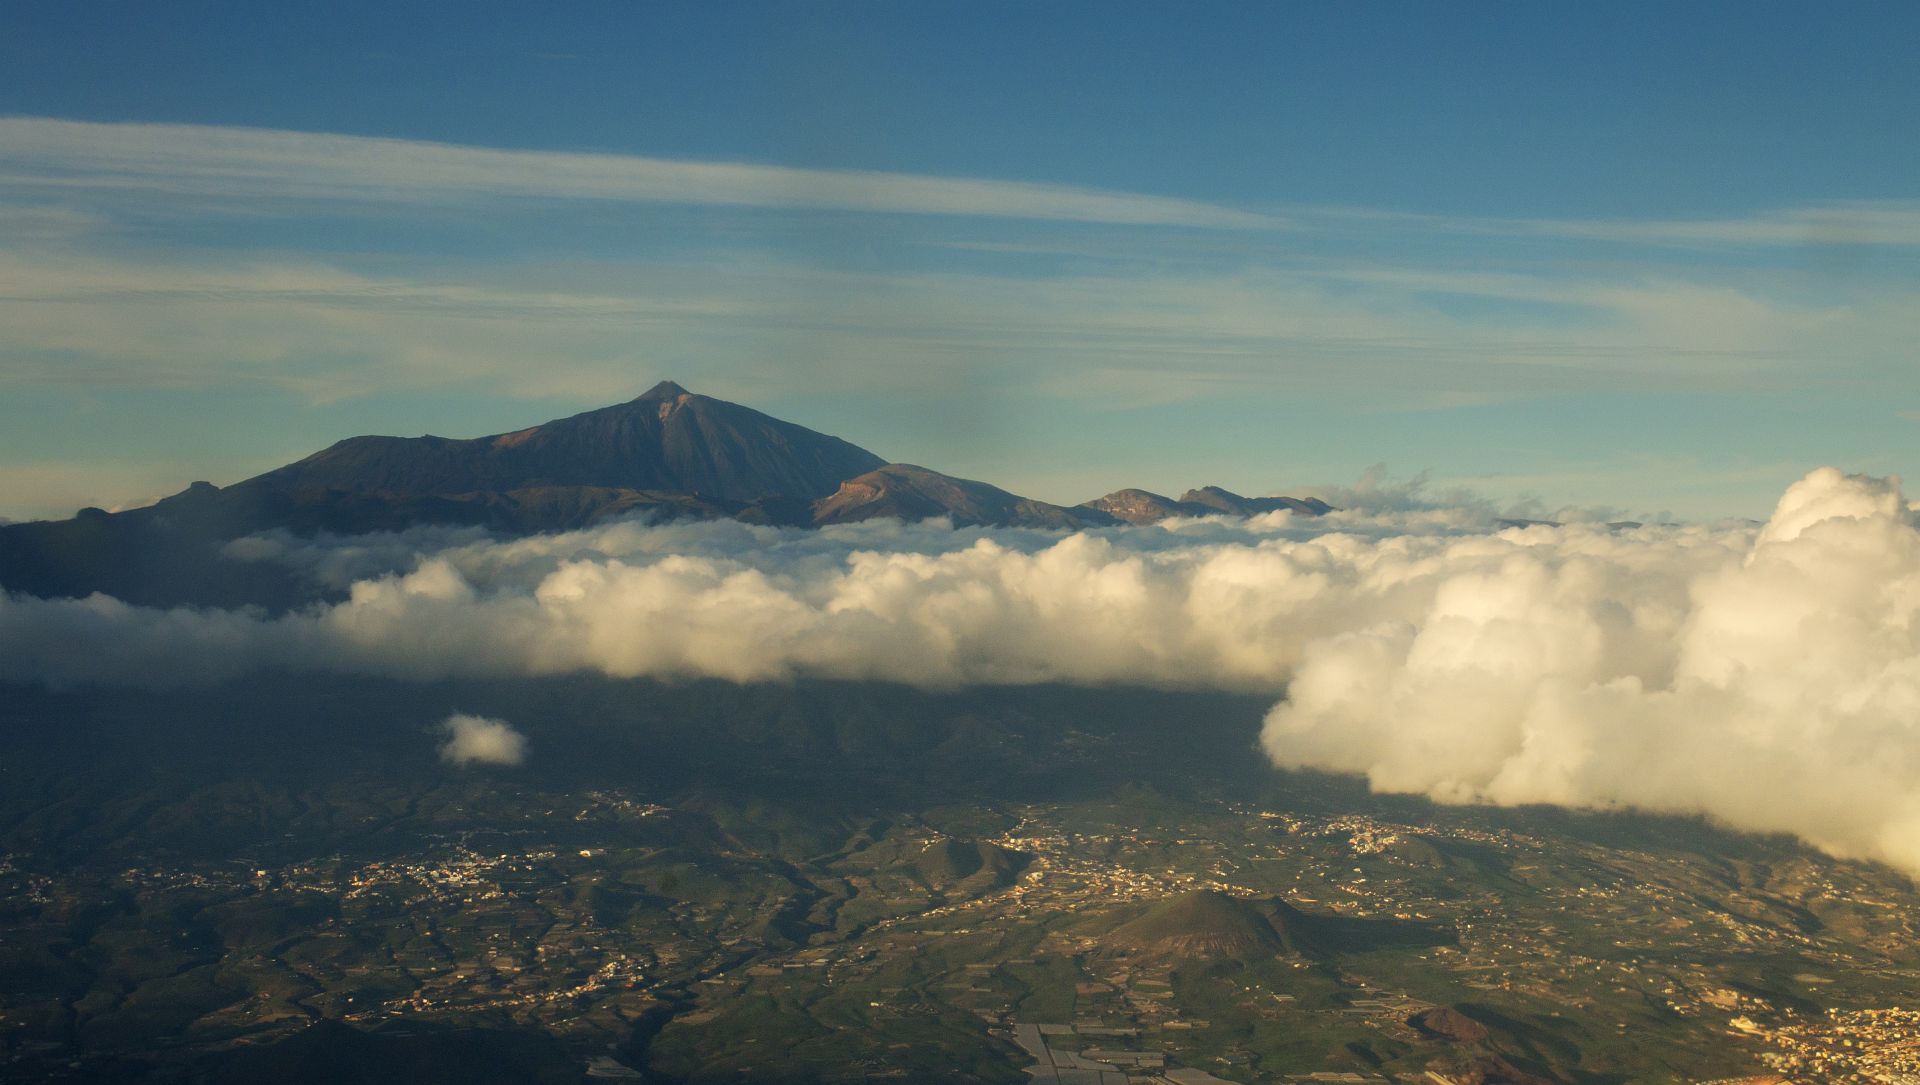 The last look at Teide from the plane. Hope to see you again!